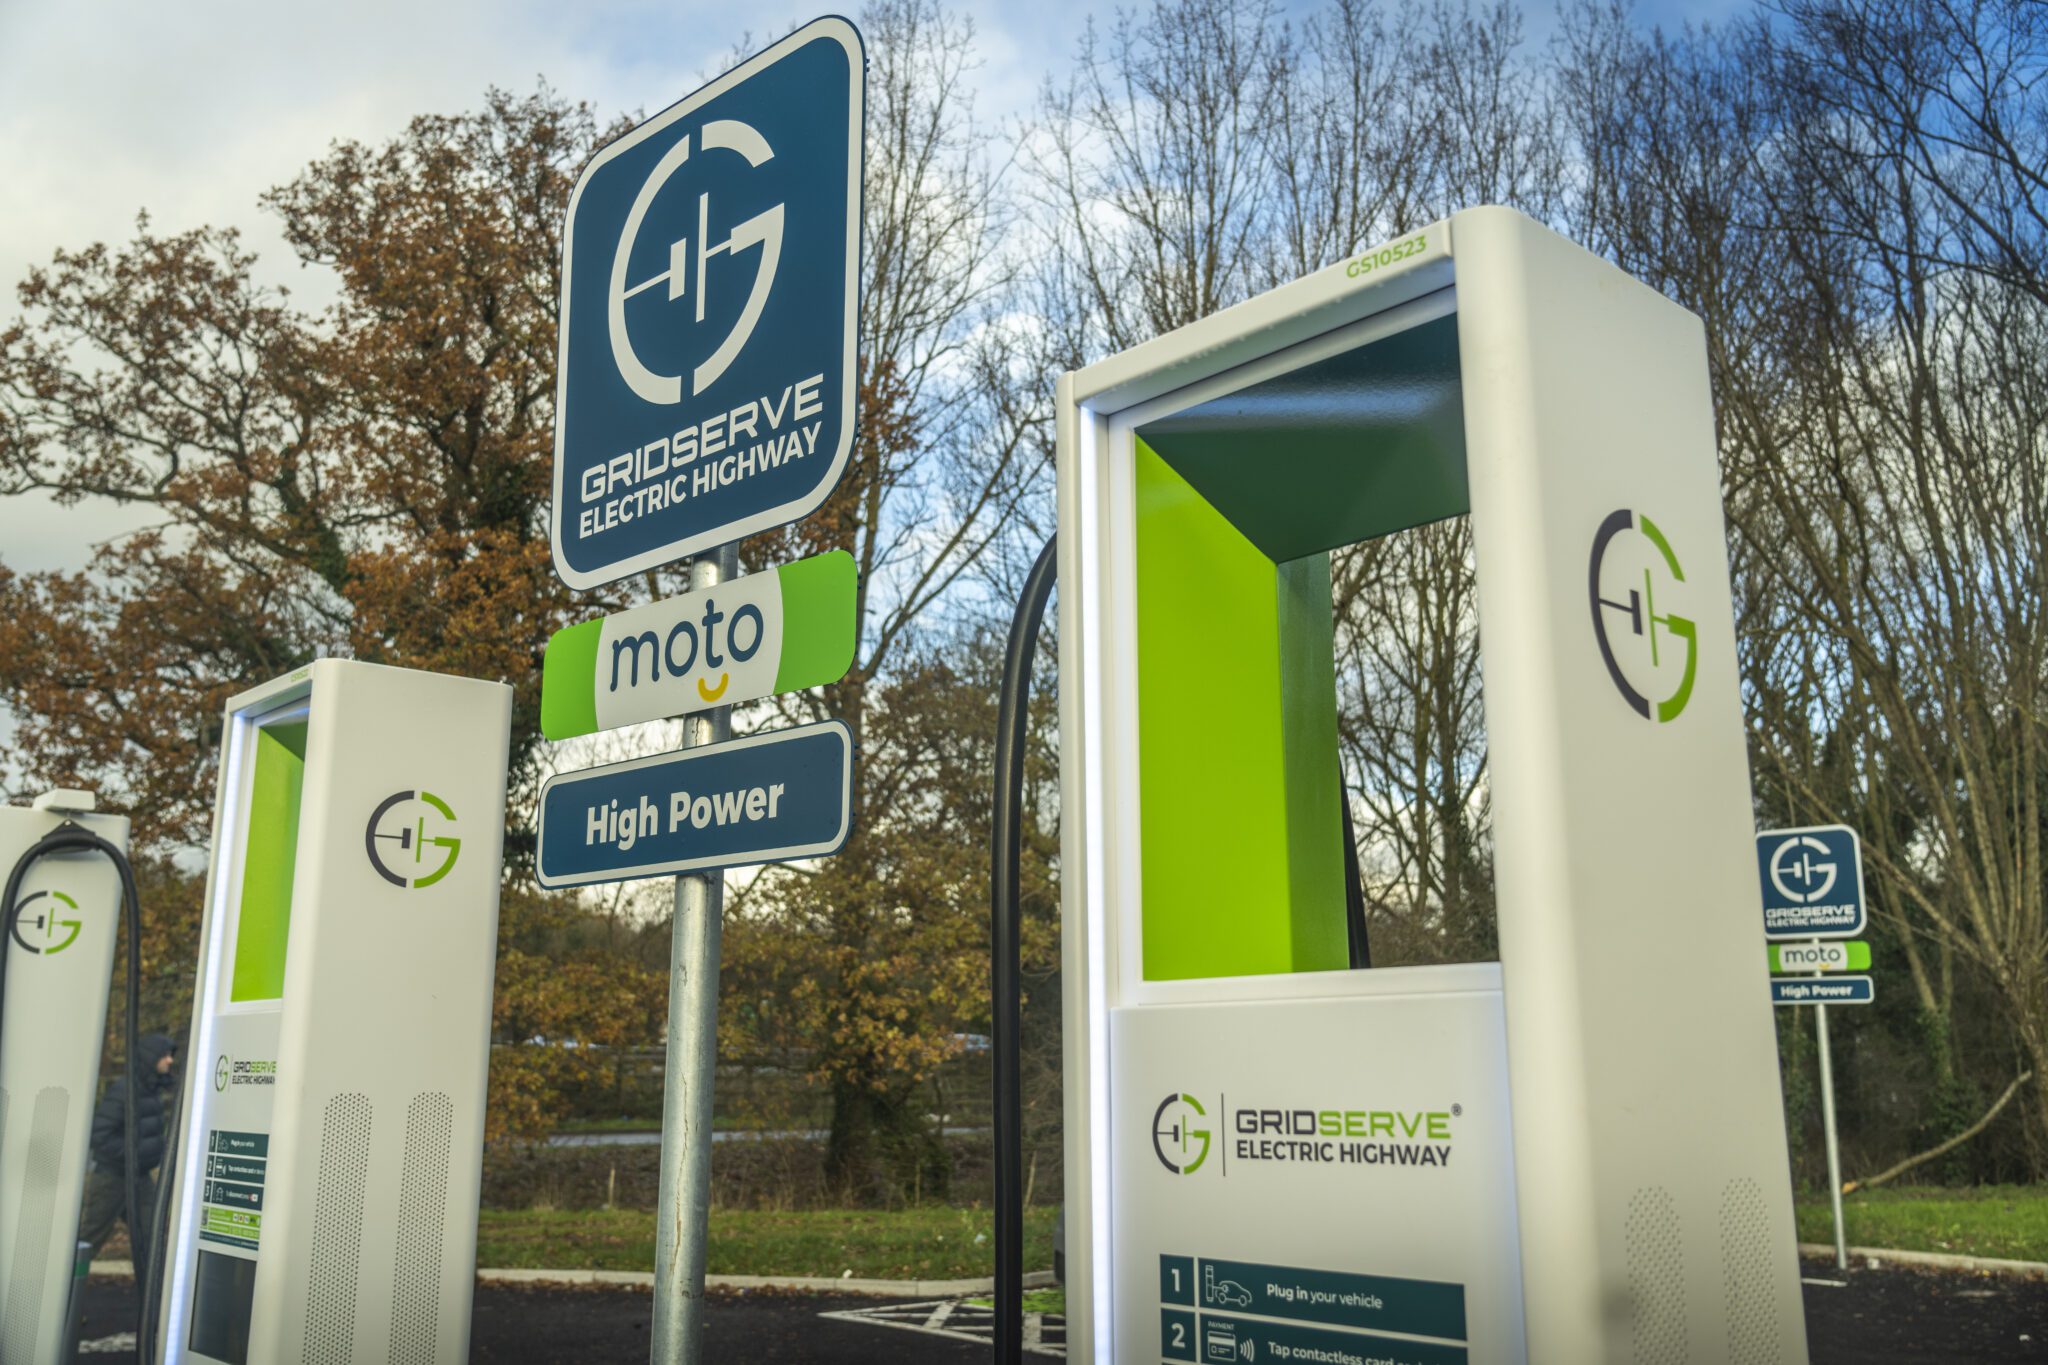 The new Electric Super Hub bolsters public charging facilities on the A1(M), one of the UK’s busiest motorways